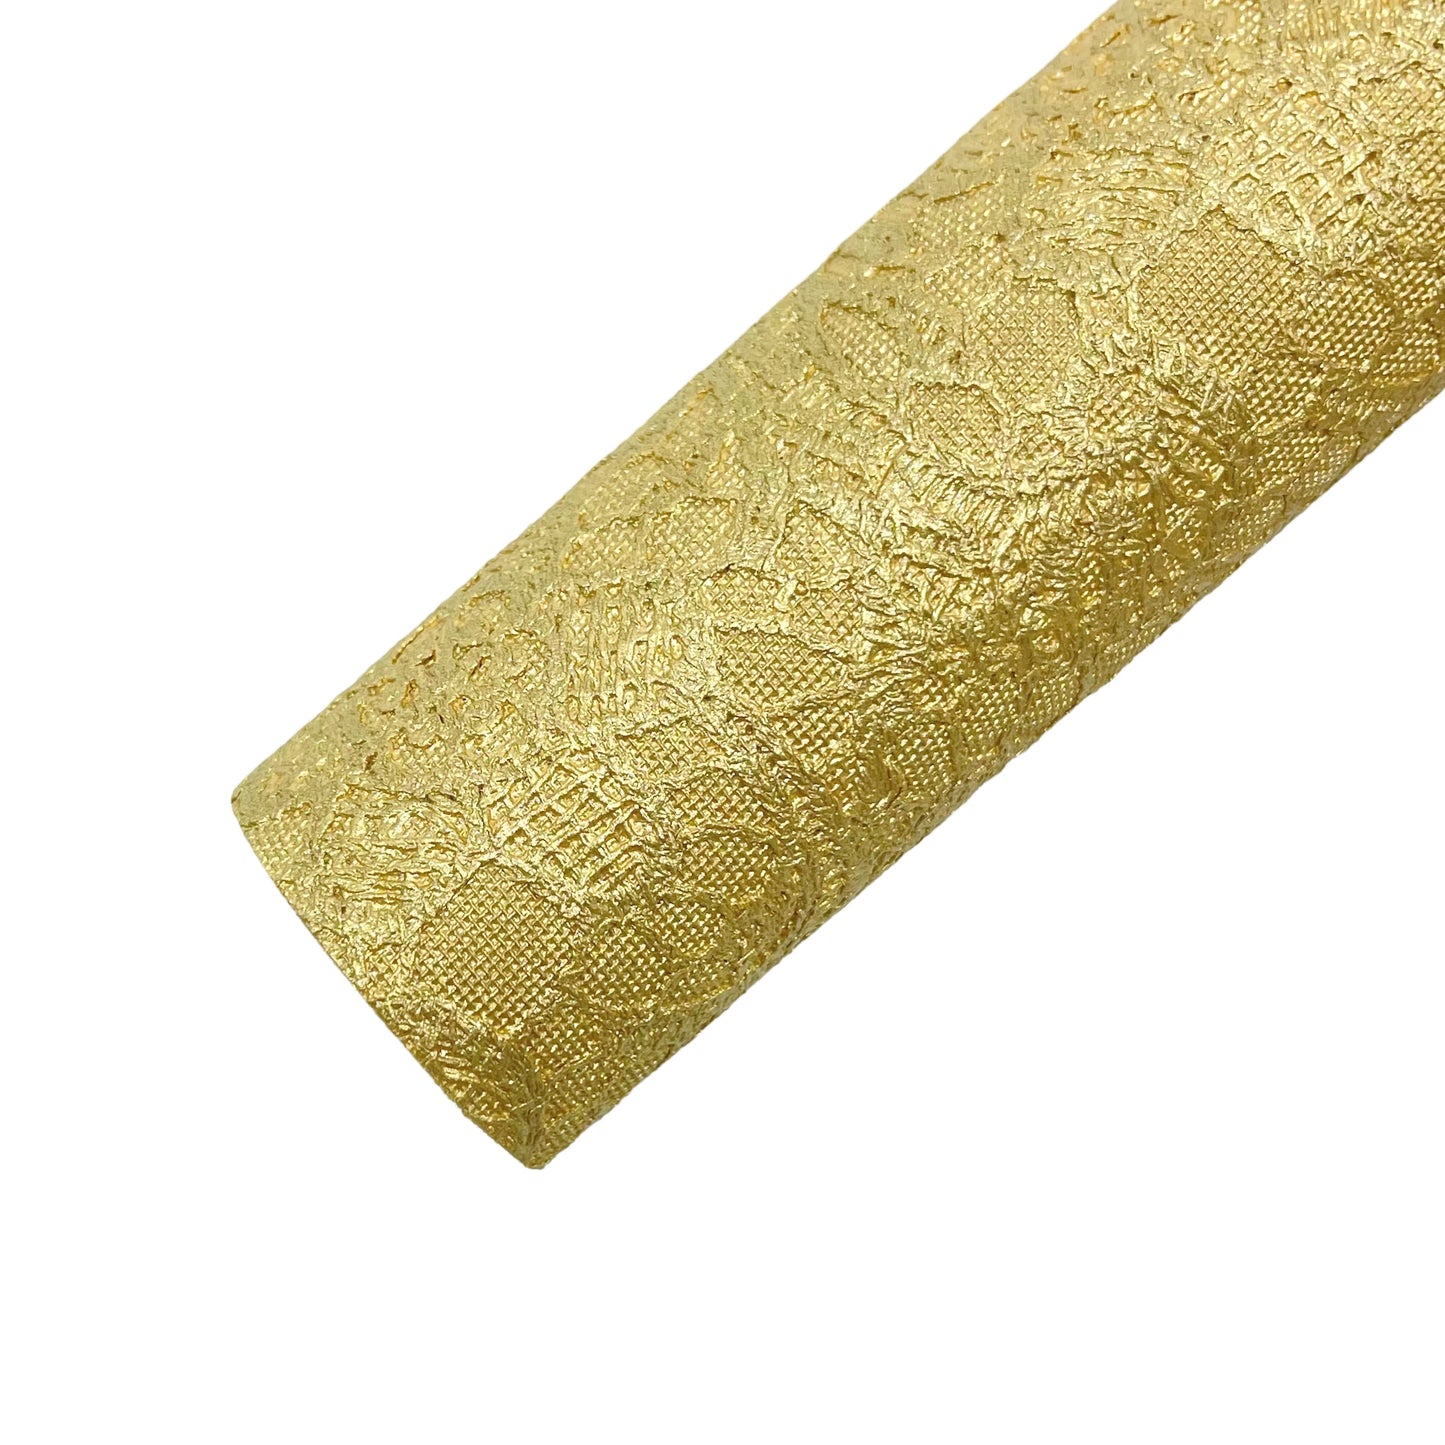 Rolled embossed lace gold metallic faux leather sheet.